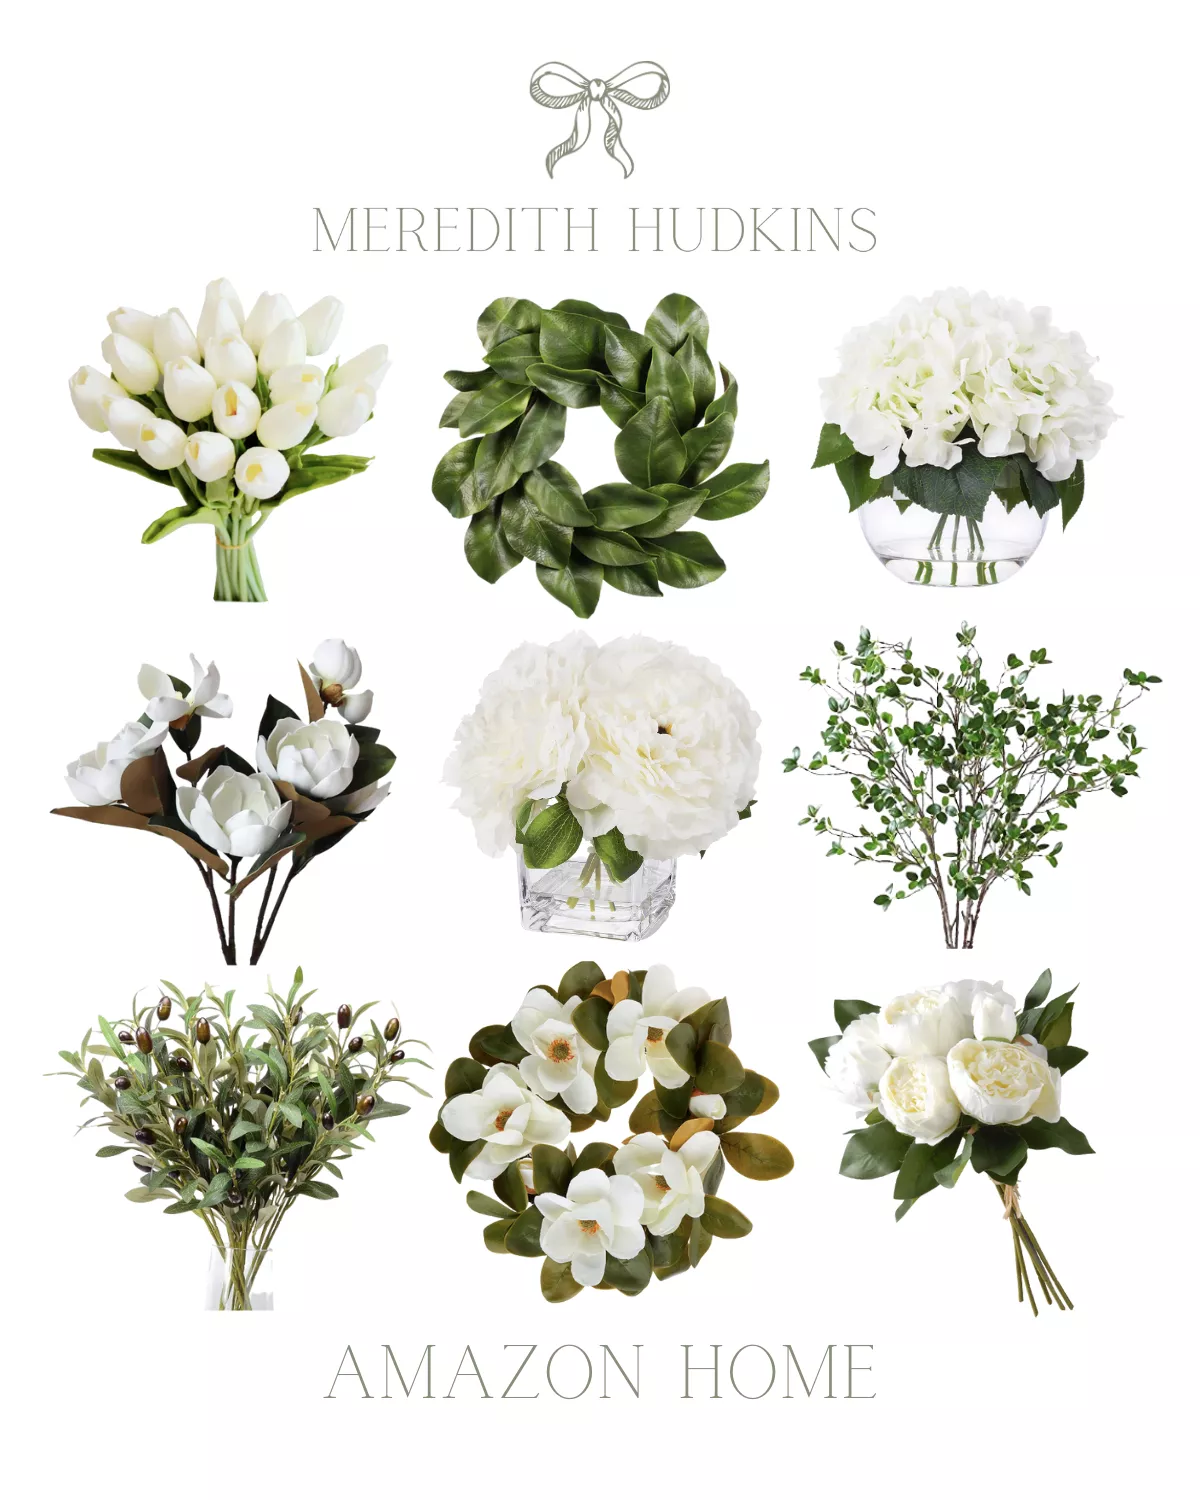 The 17 Most Popular Types of Wedding Flowers